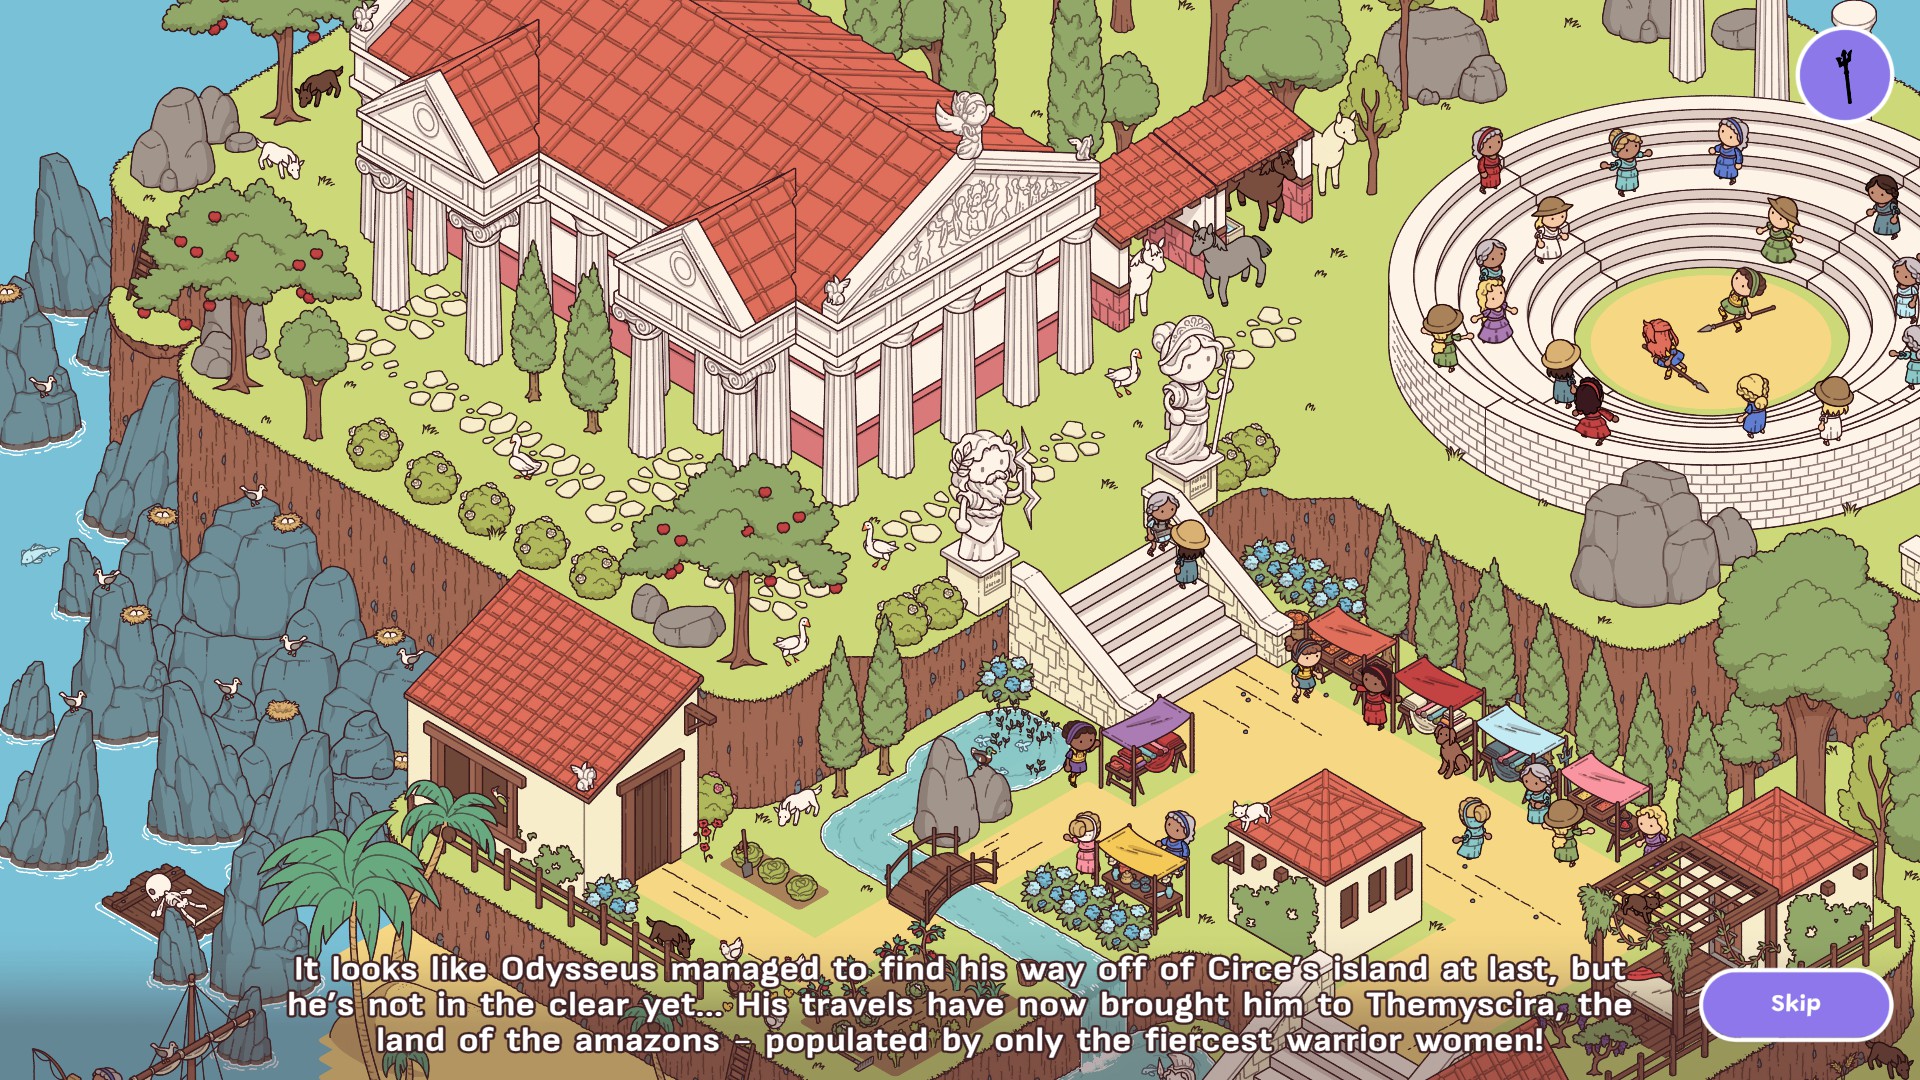 Screen Shot of the slight story that starts off each level. This one is from the Greek Mythology levels and talks about Odysseus's travel to Themyscira, the land of the amazons while showing a little market space and greek buildings with all female characters.